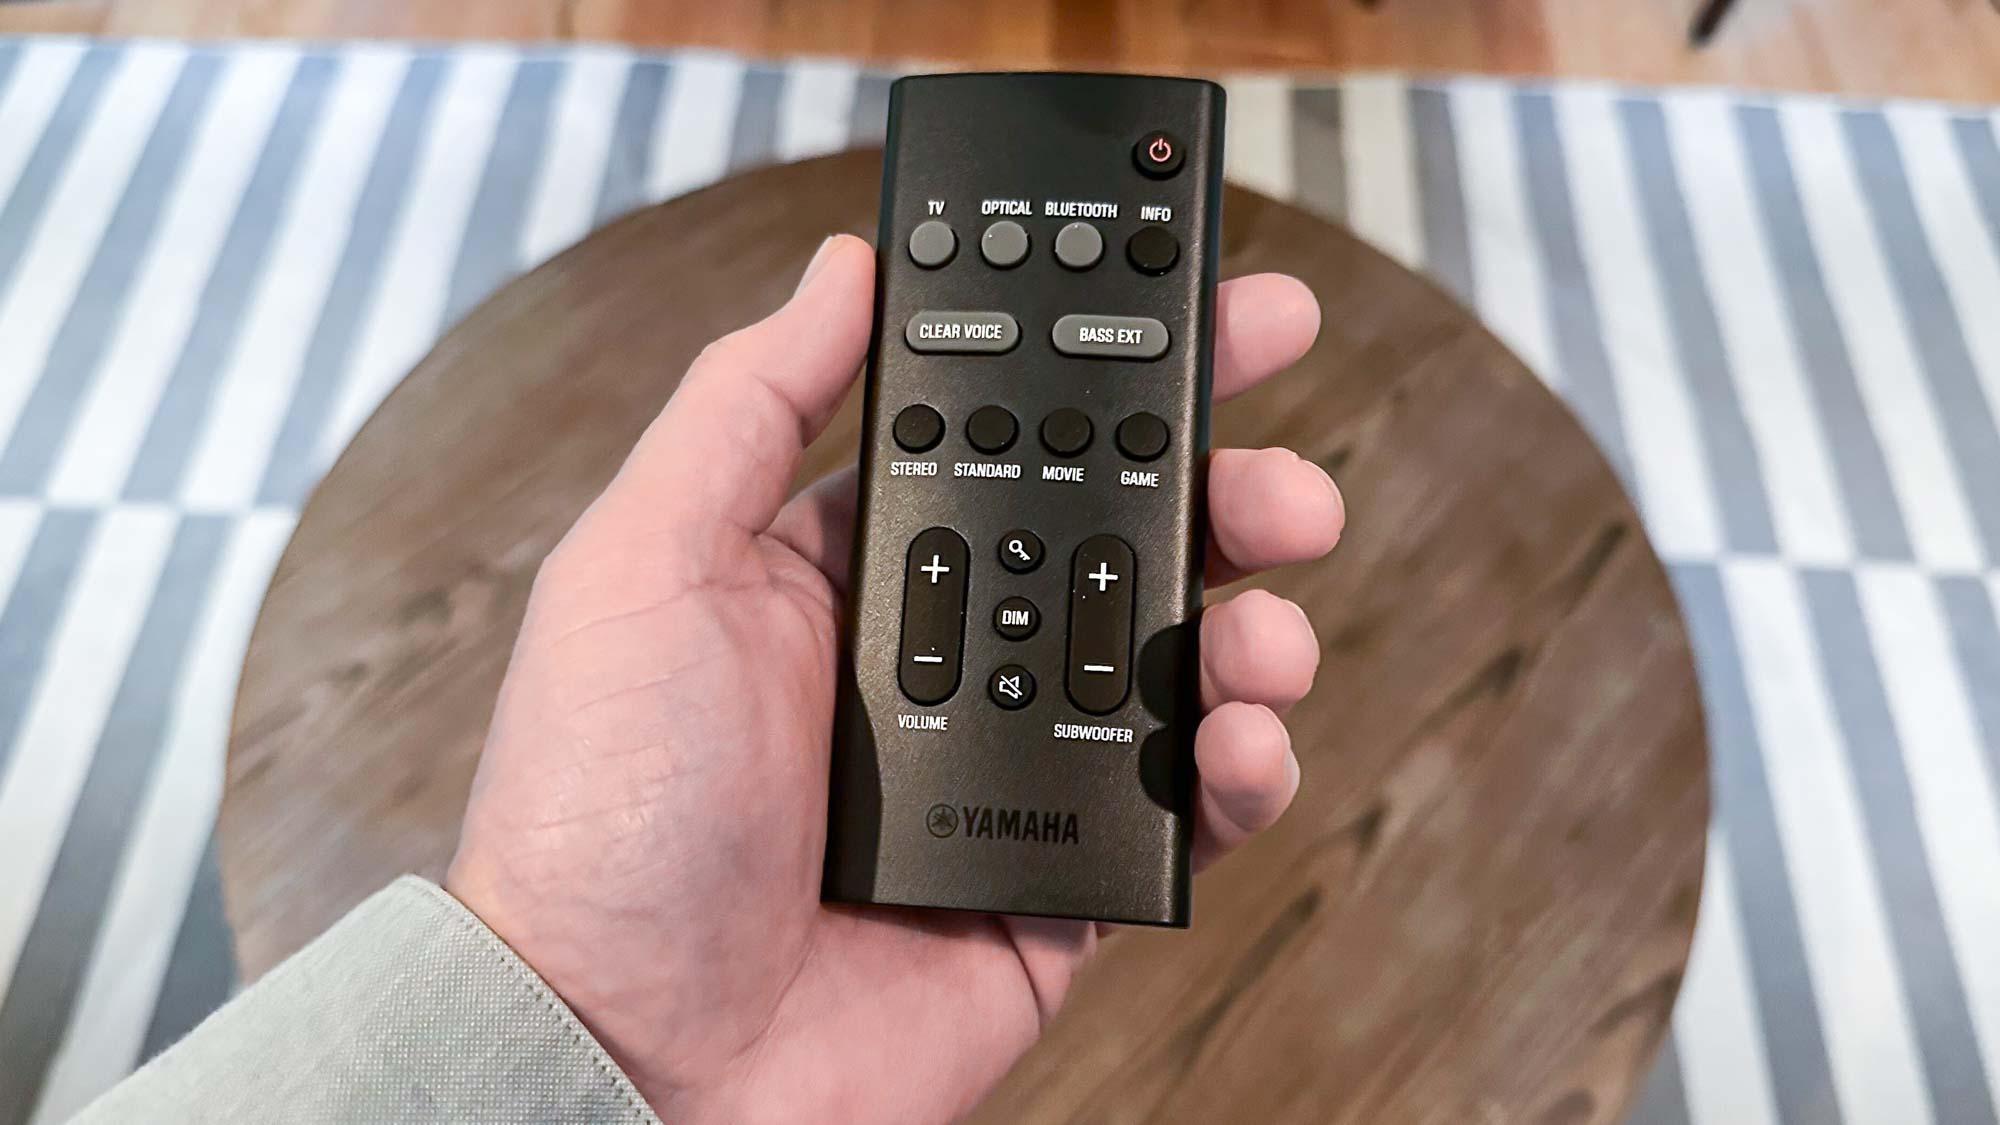 Remote handset in hand for the Yamaha SR-B40A